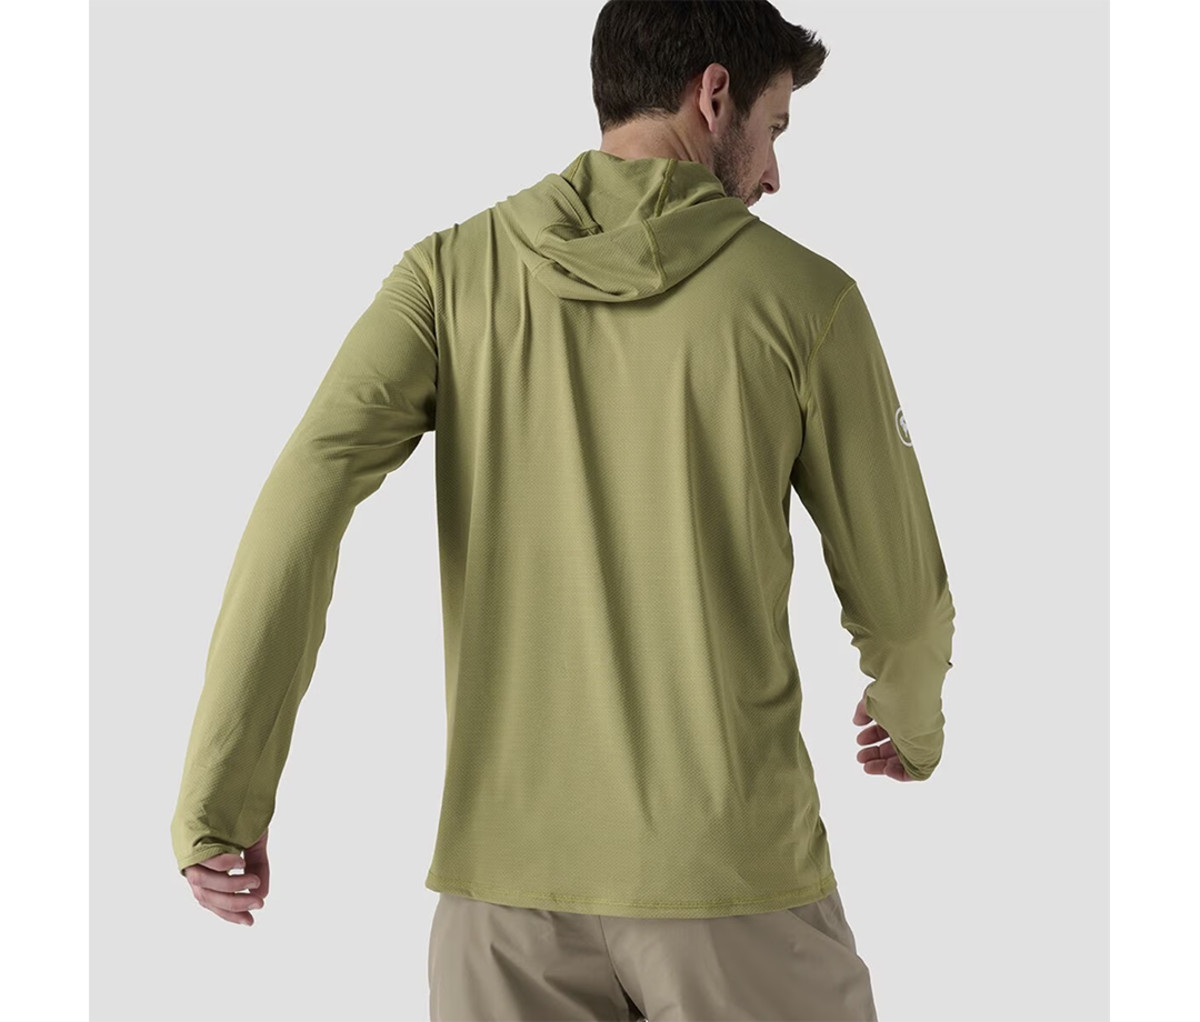 This Tahoe Sun Hoodie Workout Shirt Is 40% Off - Men's Journal